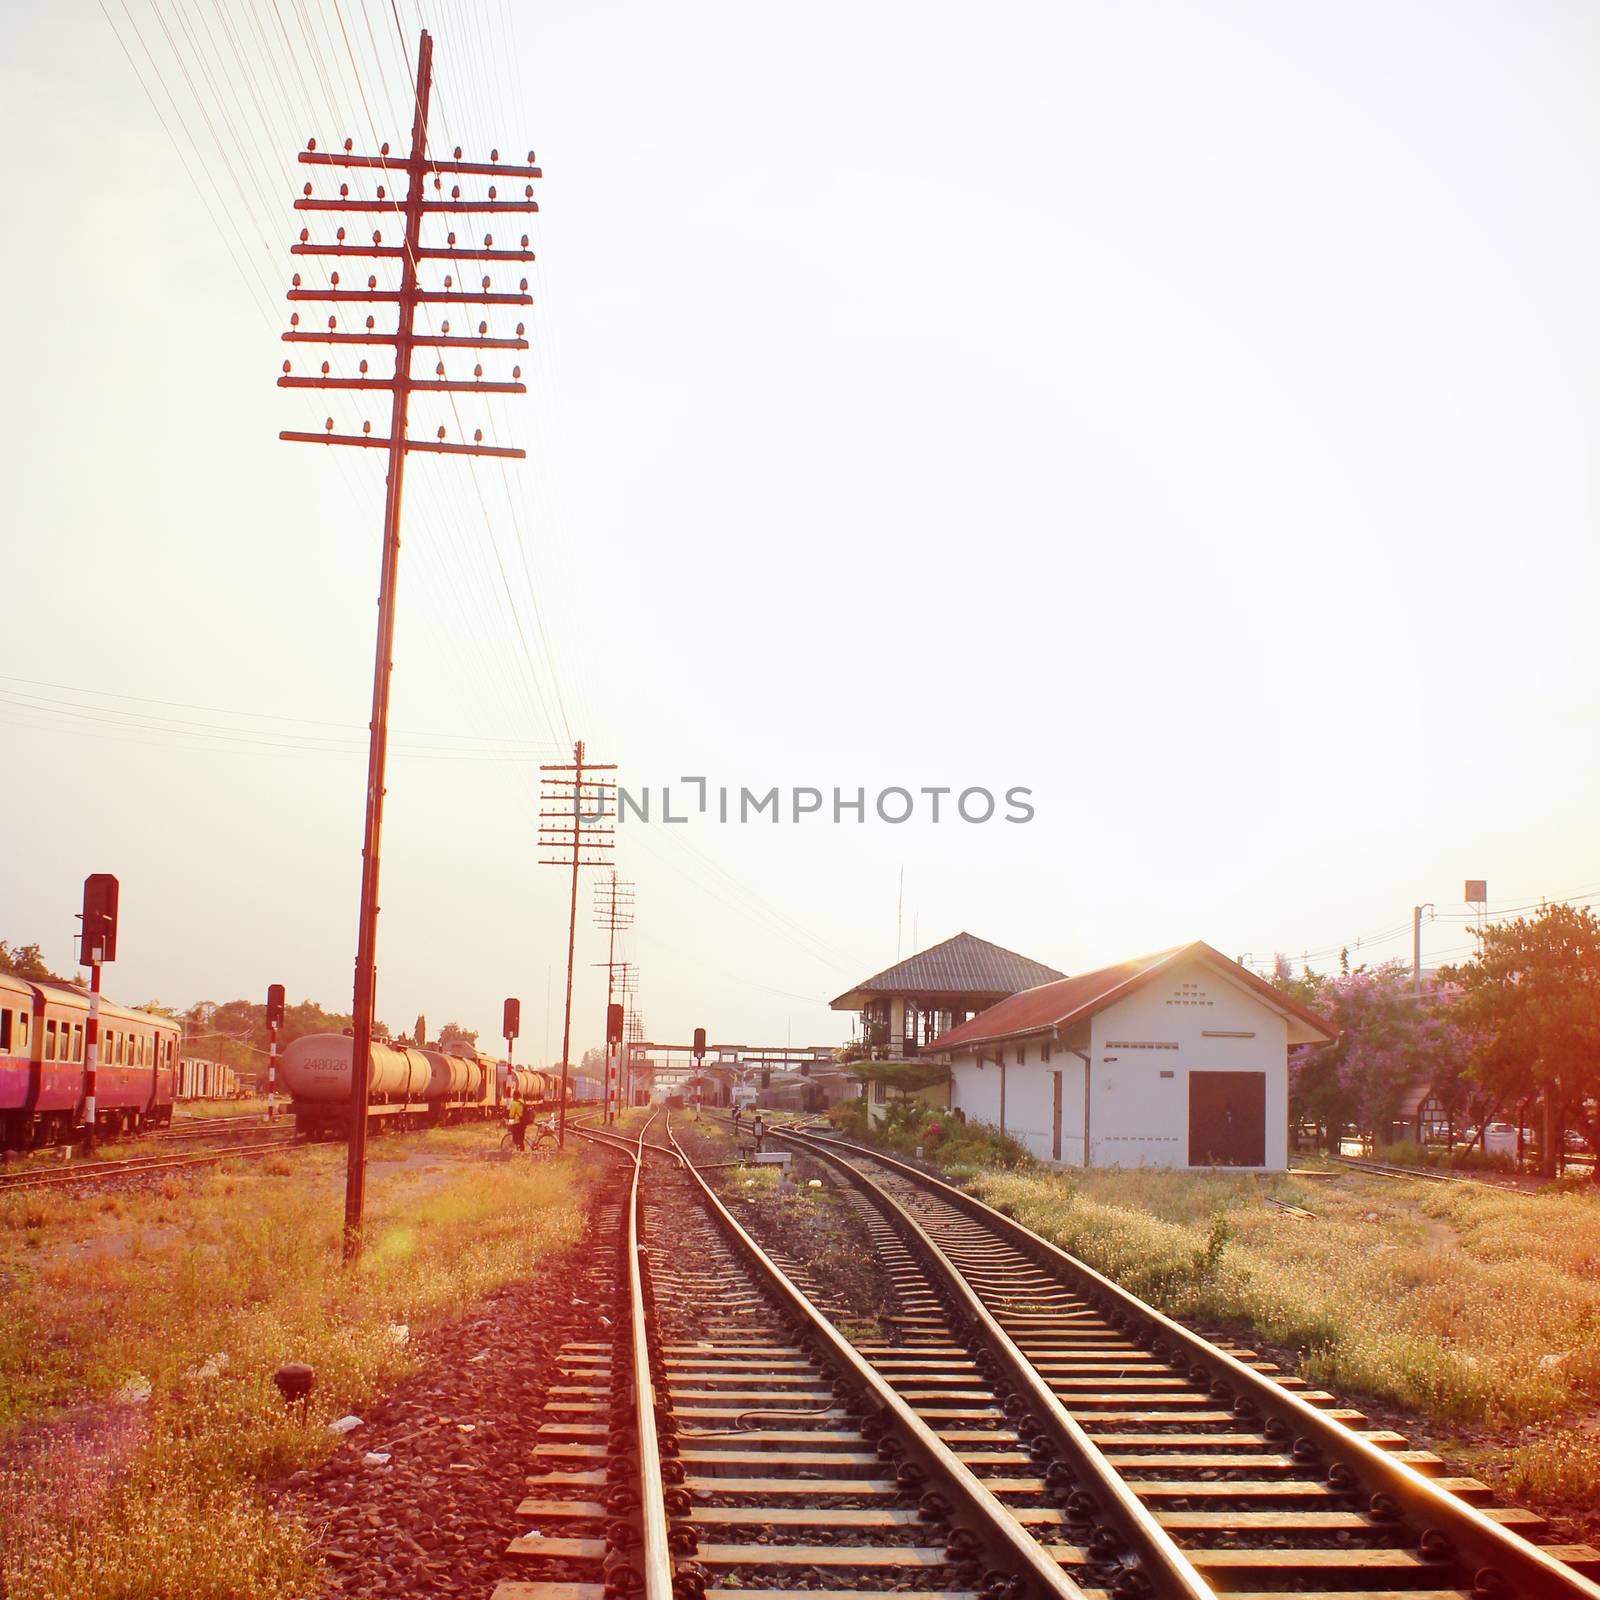 Old railway station with retro filter effect by nuchylee